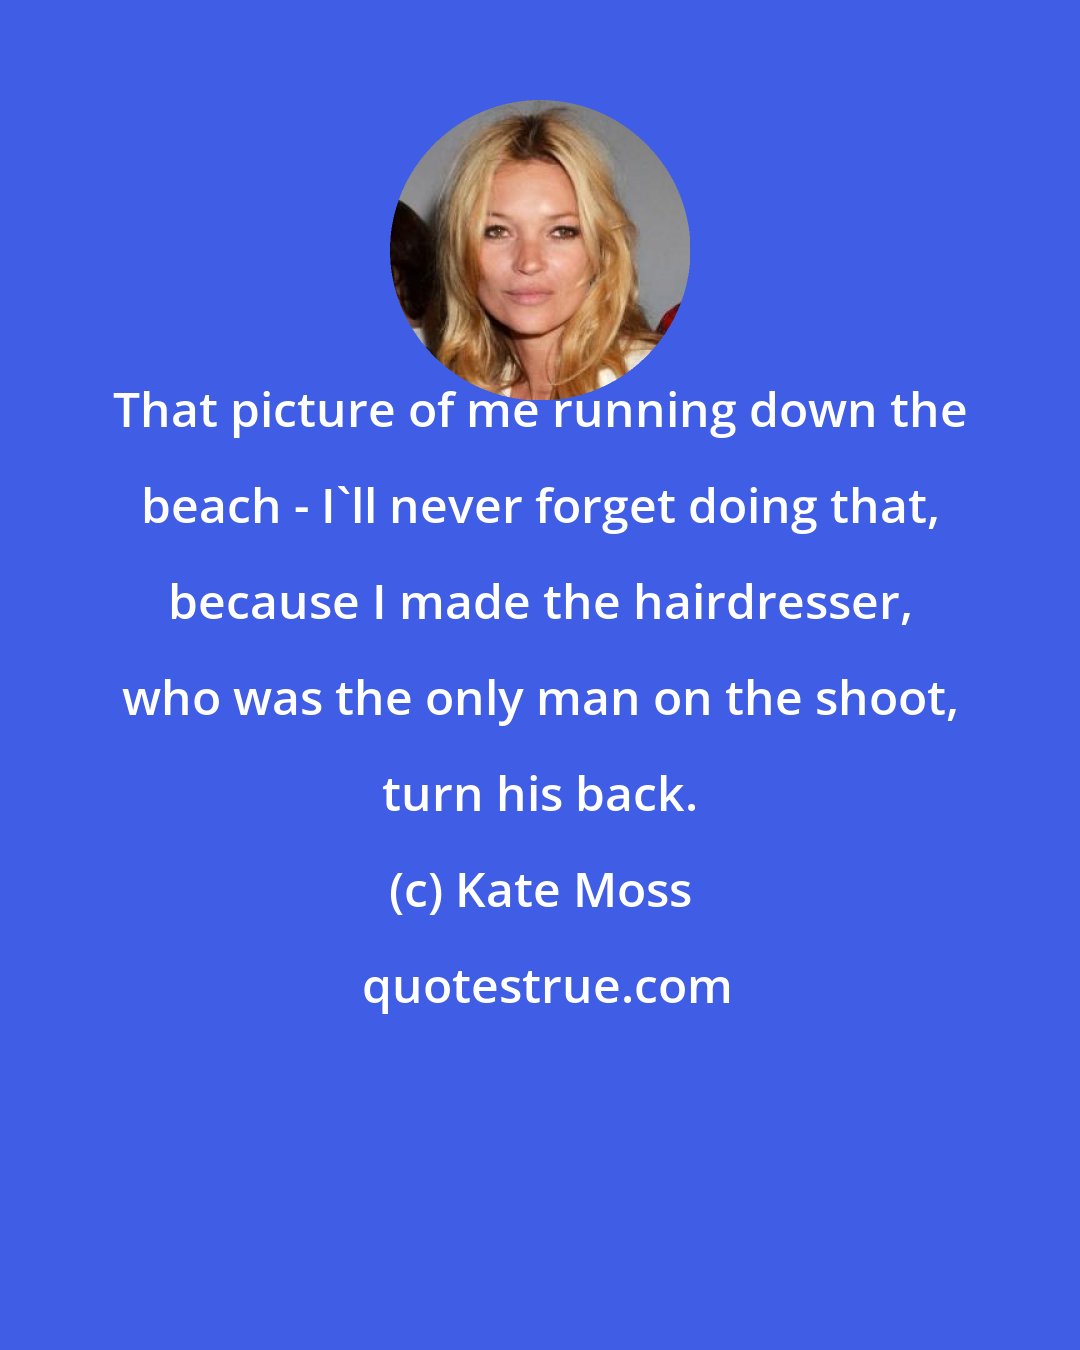 Kate Moss: That picture of me running down the beach - I'll never forget doing that, because I made the hairdresser, who was the only man on the shoot, turn his back.